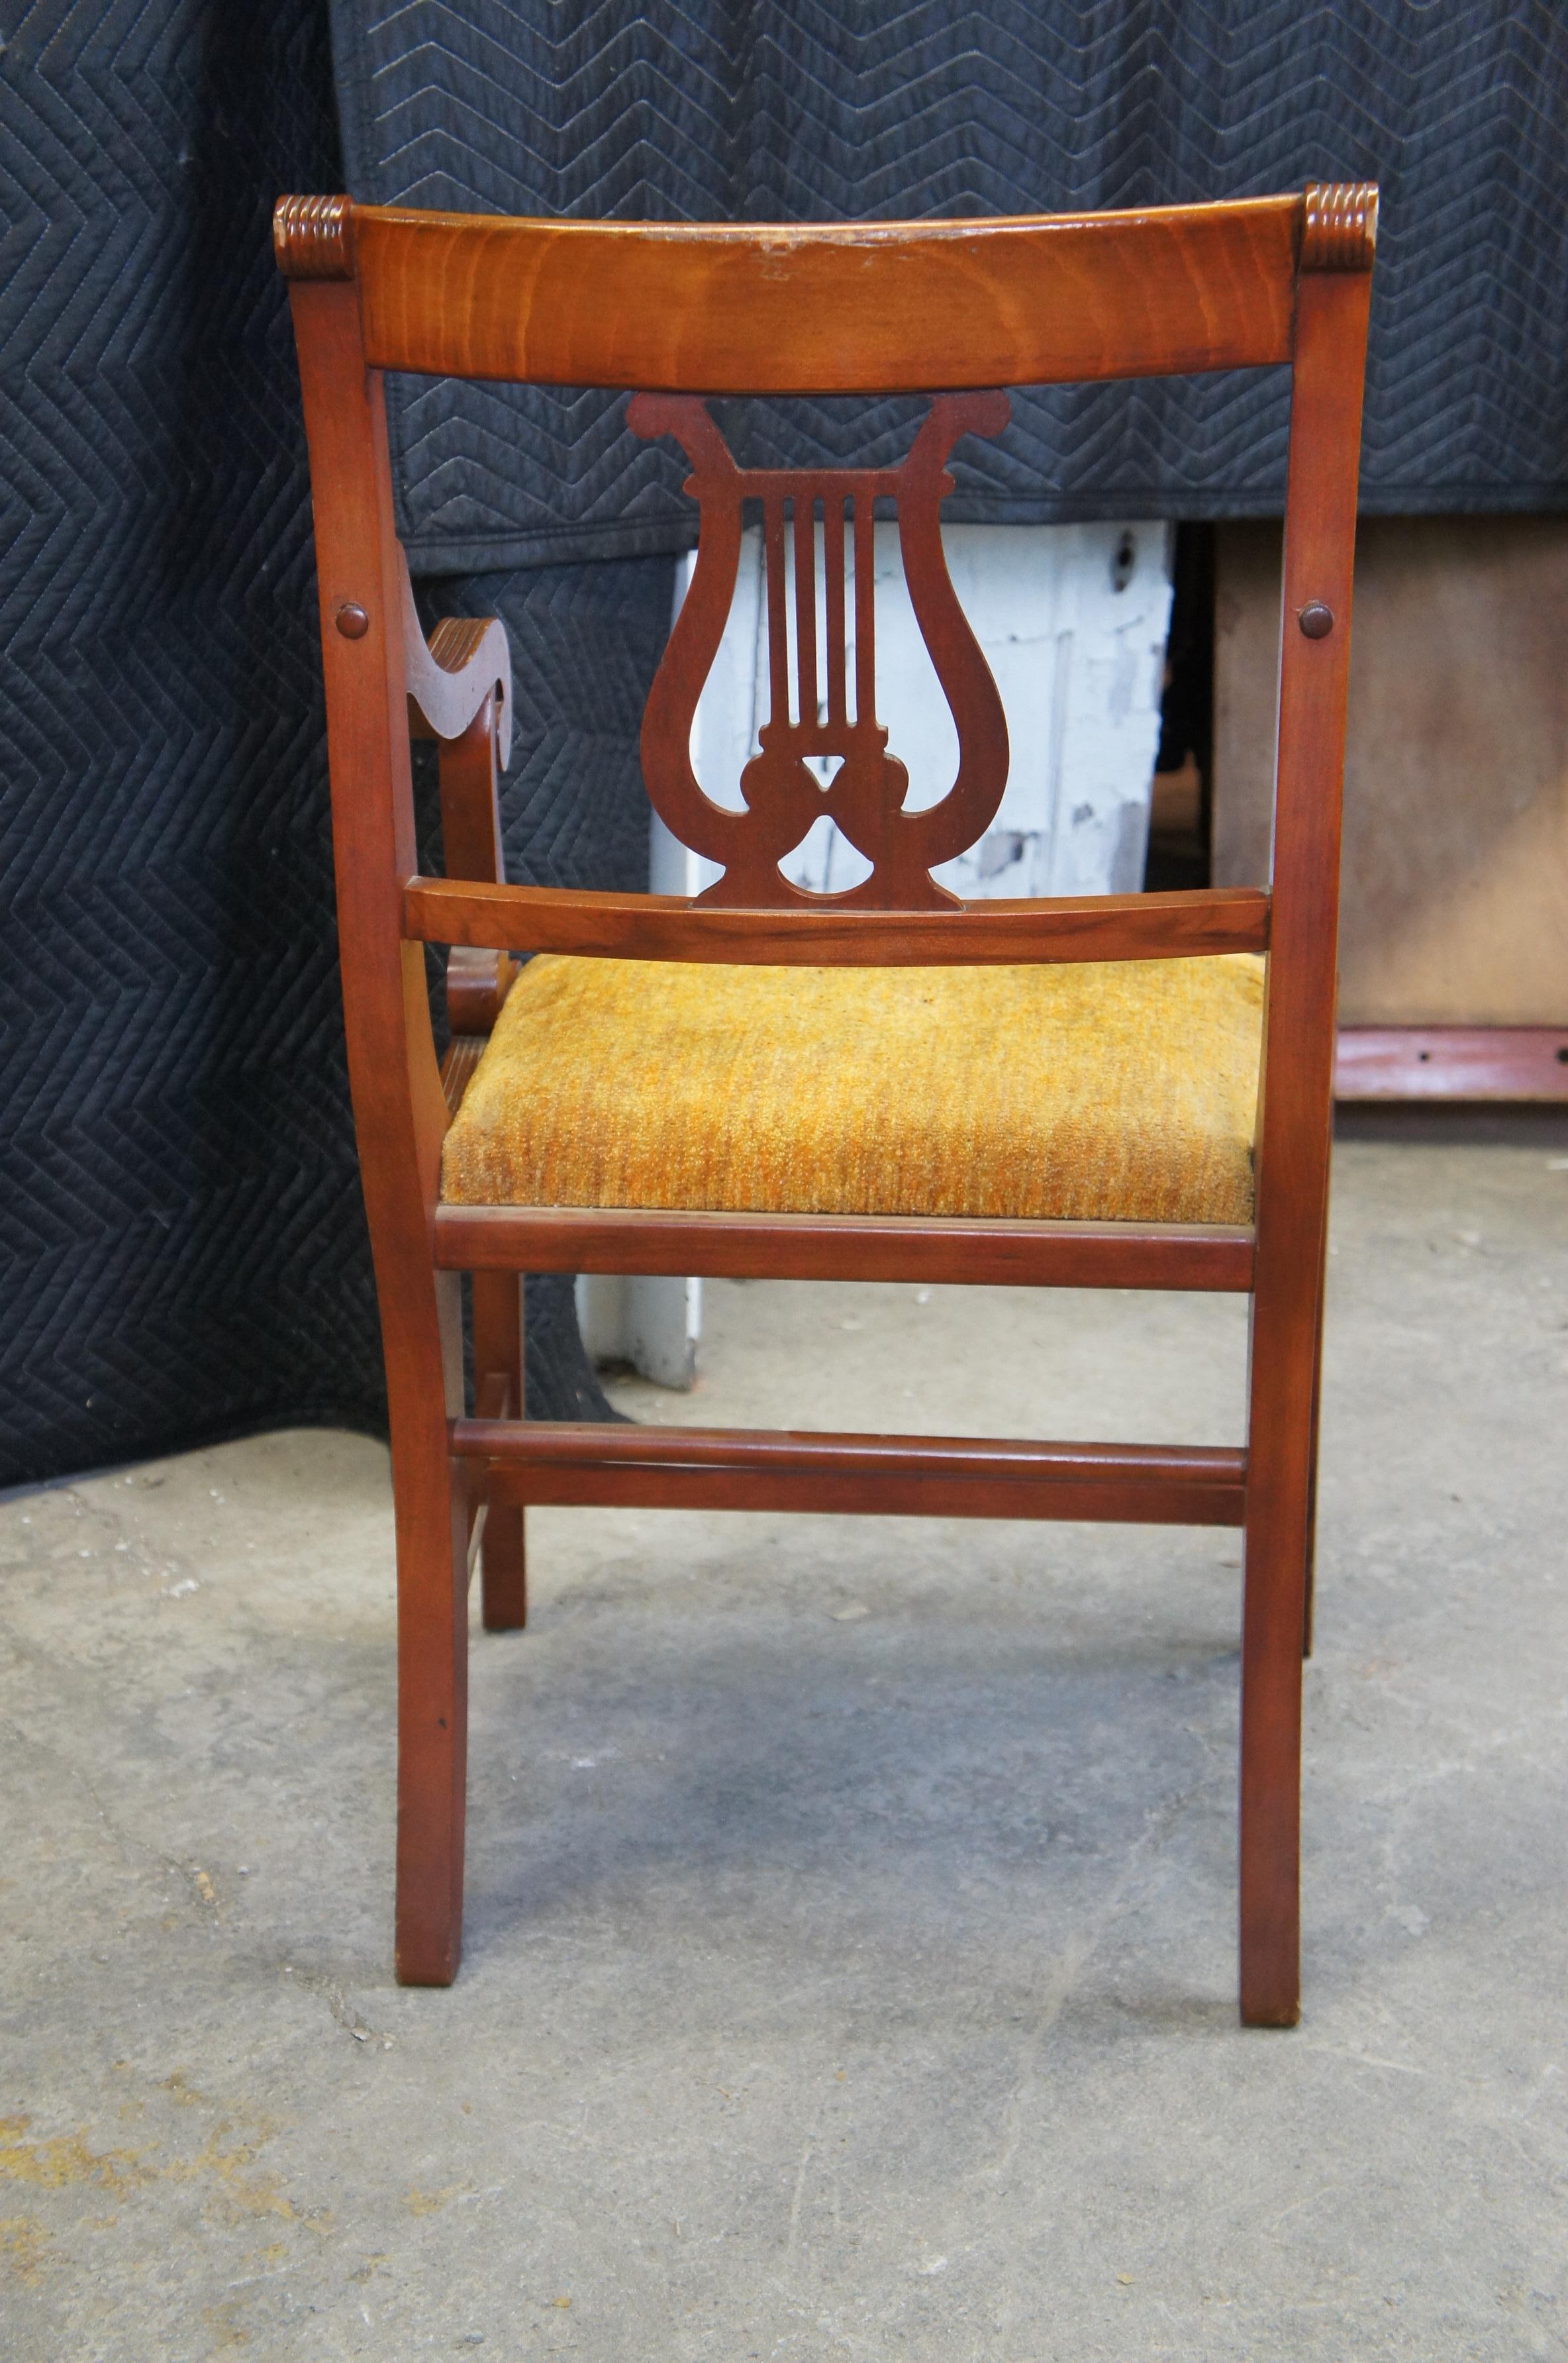 how to identify duncan phyfe chairs